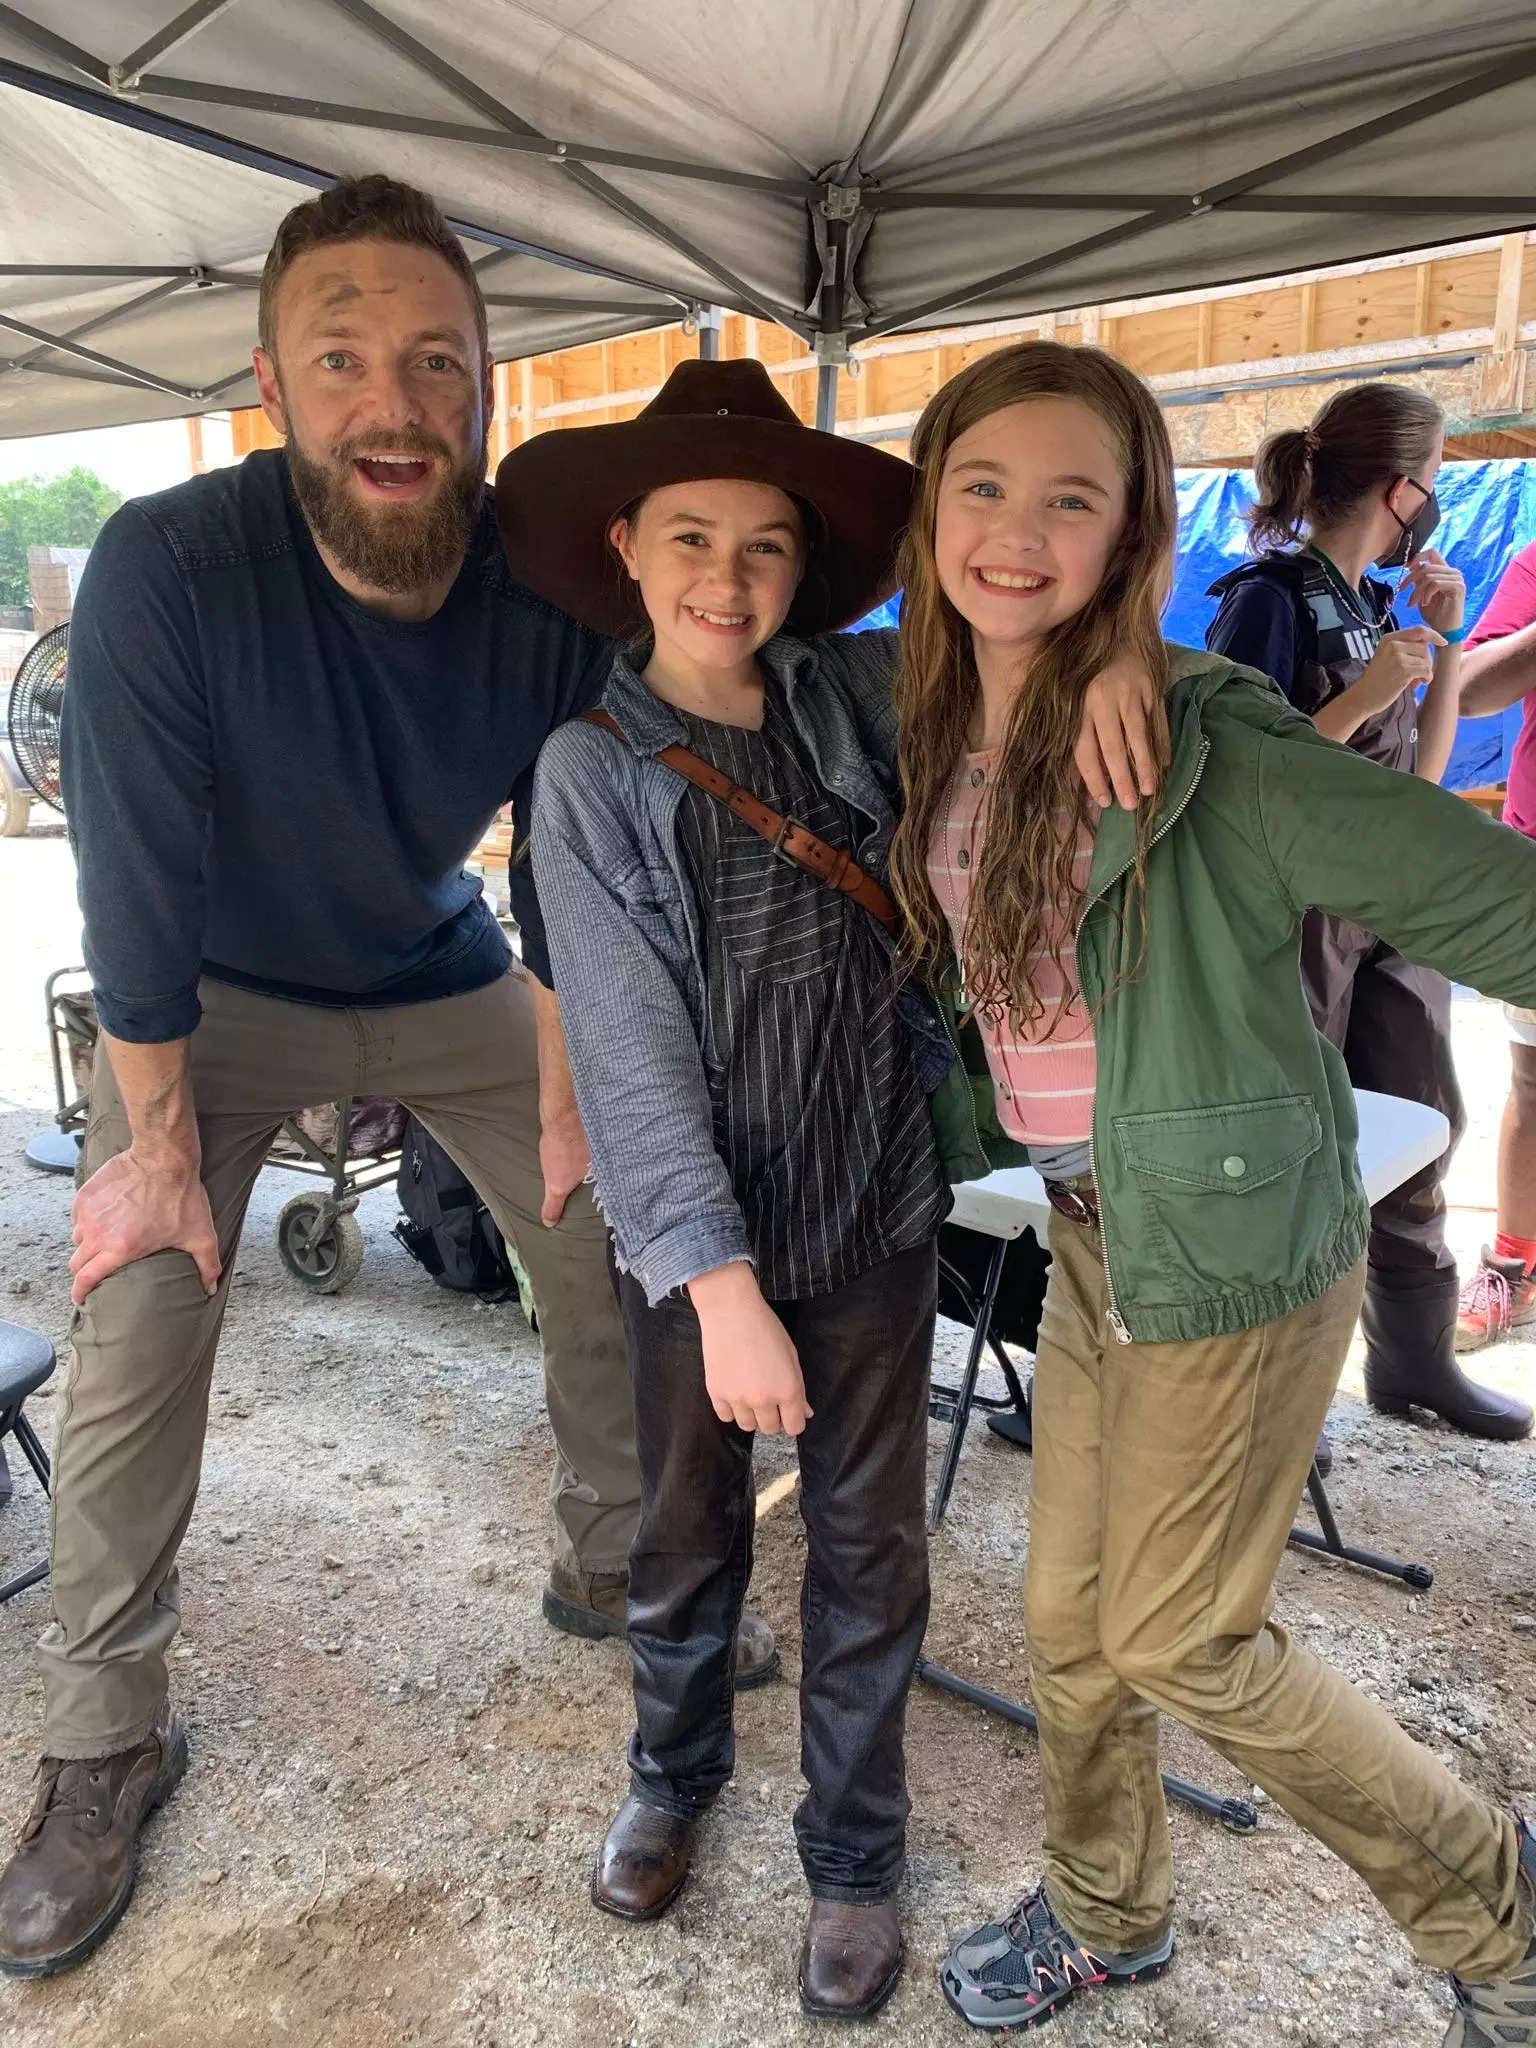 Cailey Fleming behind-the-scenes twd photos